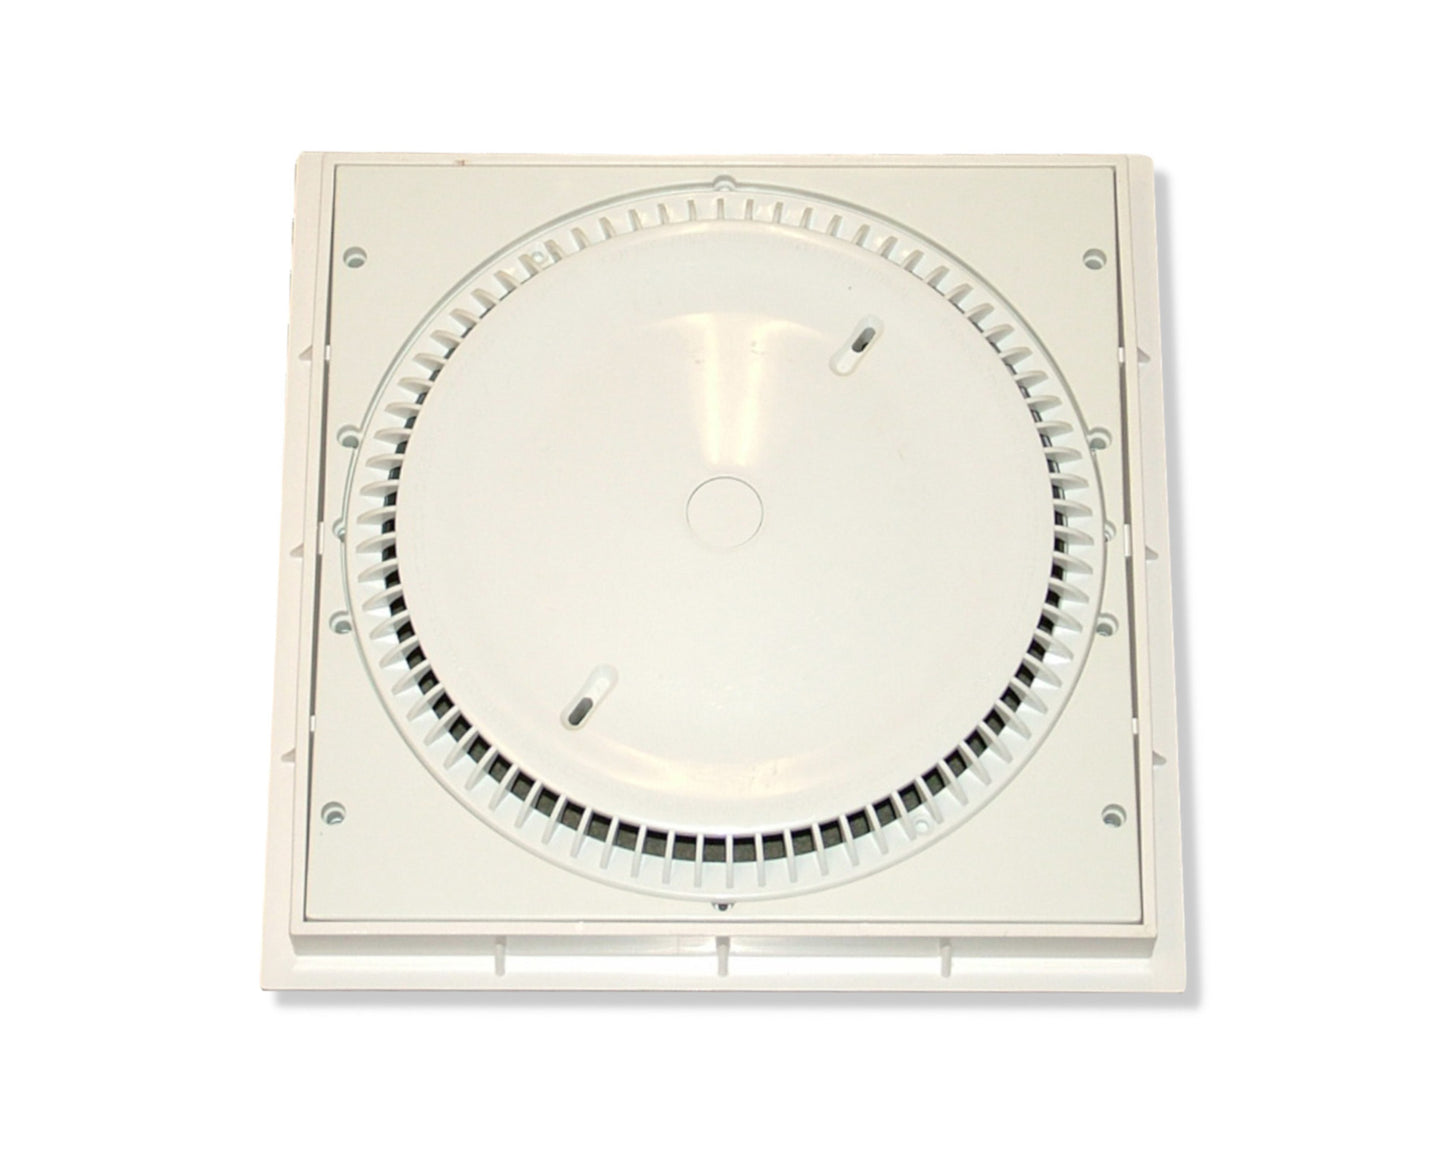 Afras Anti-Vortex ABS Drain Cover 11 inches White ABS with Ringplate for Pools